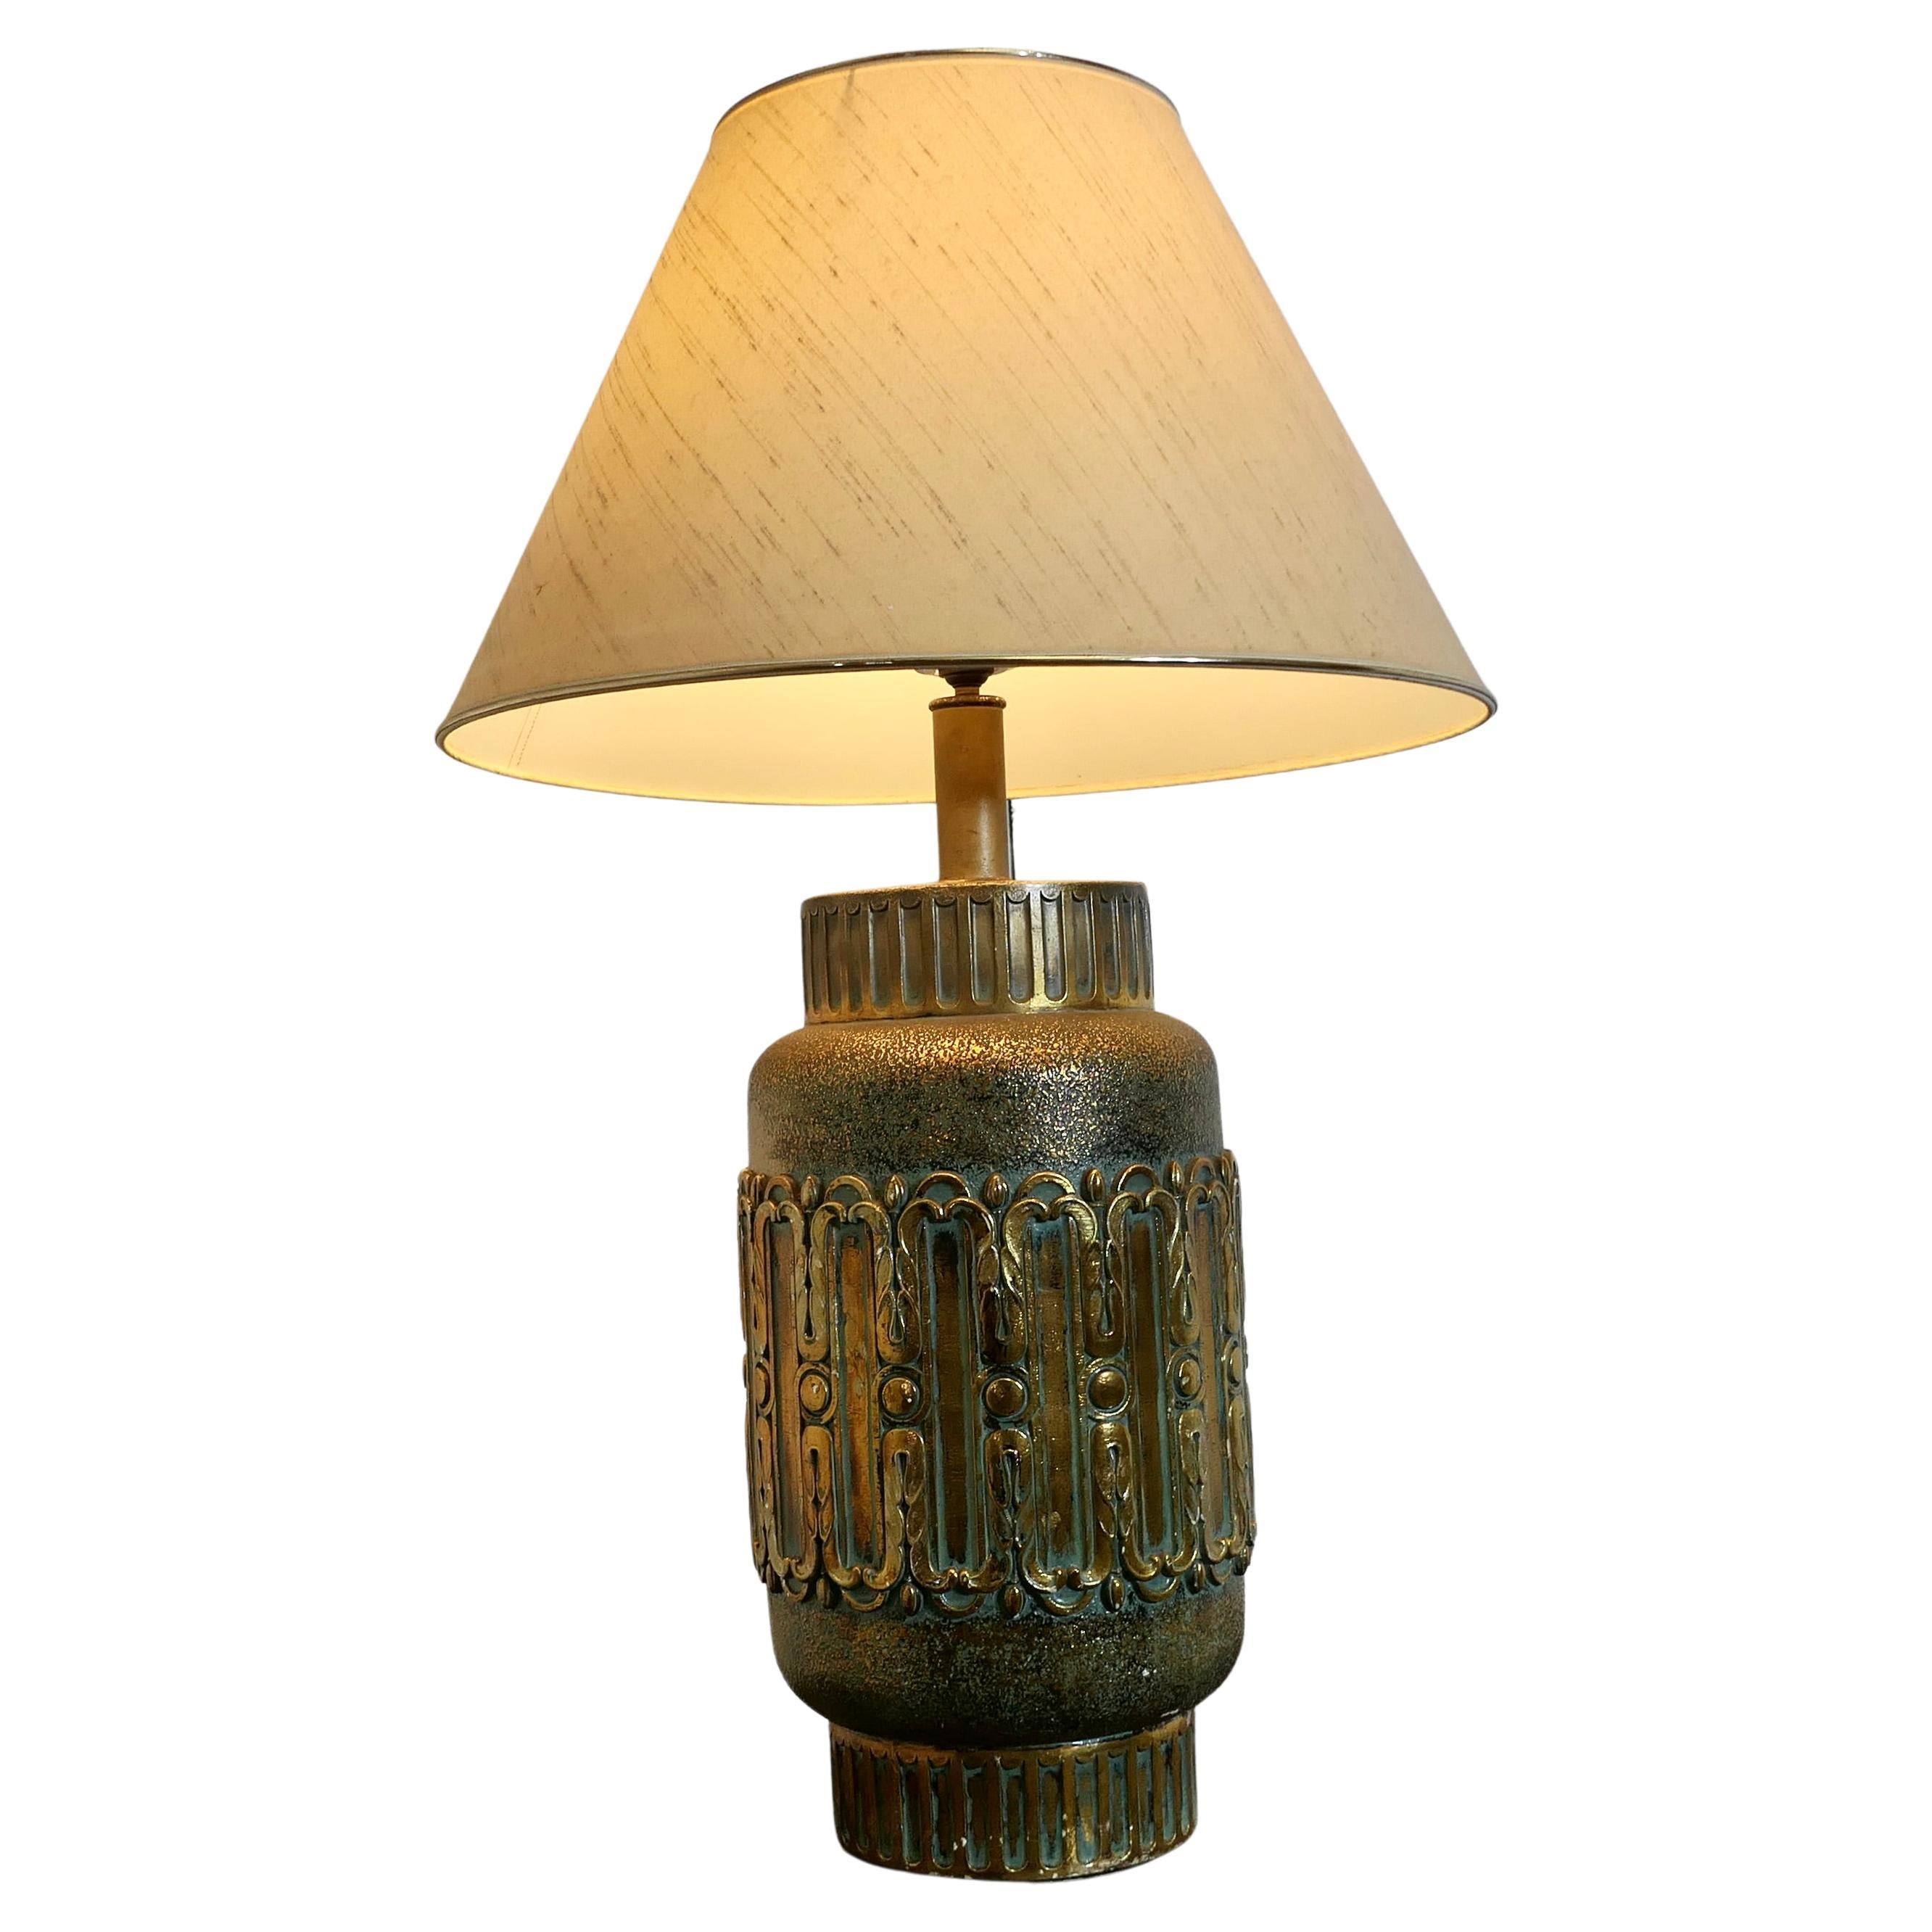 Large Bulbous Simulated Brass Ceramic Vase Lamp    For Sale